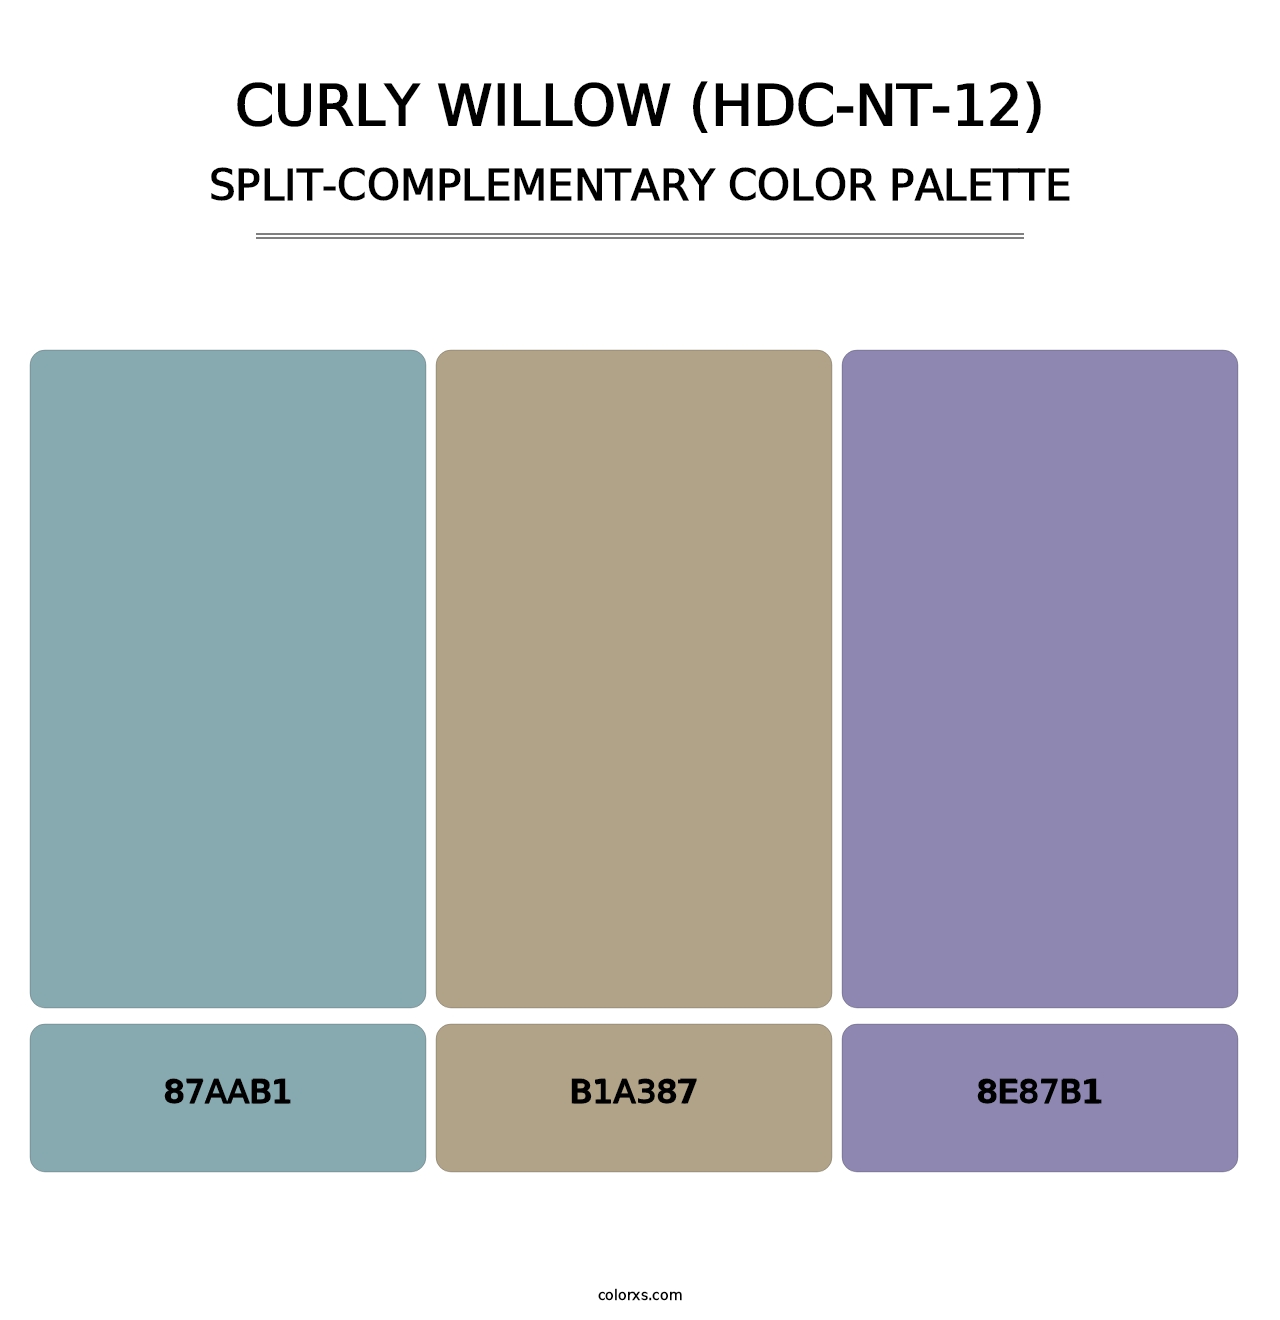 Curly Willow (HDC-NT-12) - Split-Complementary Color Palette